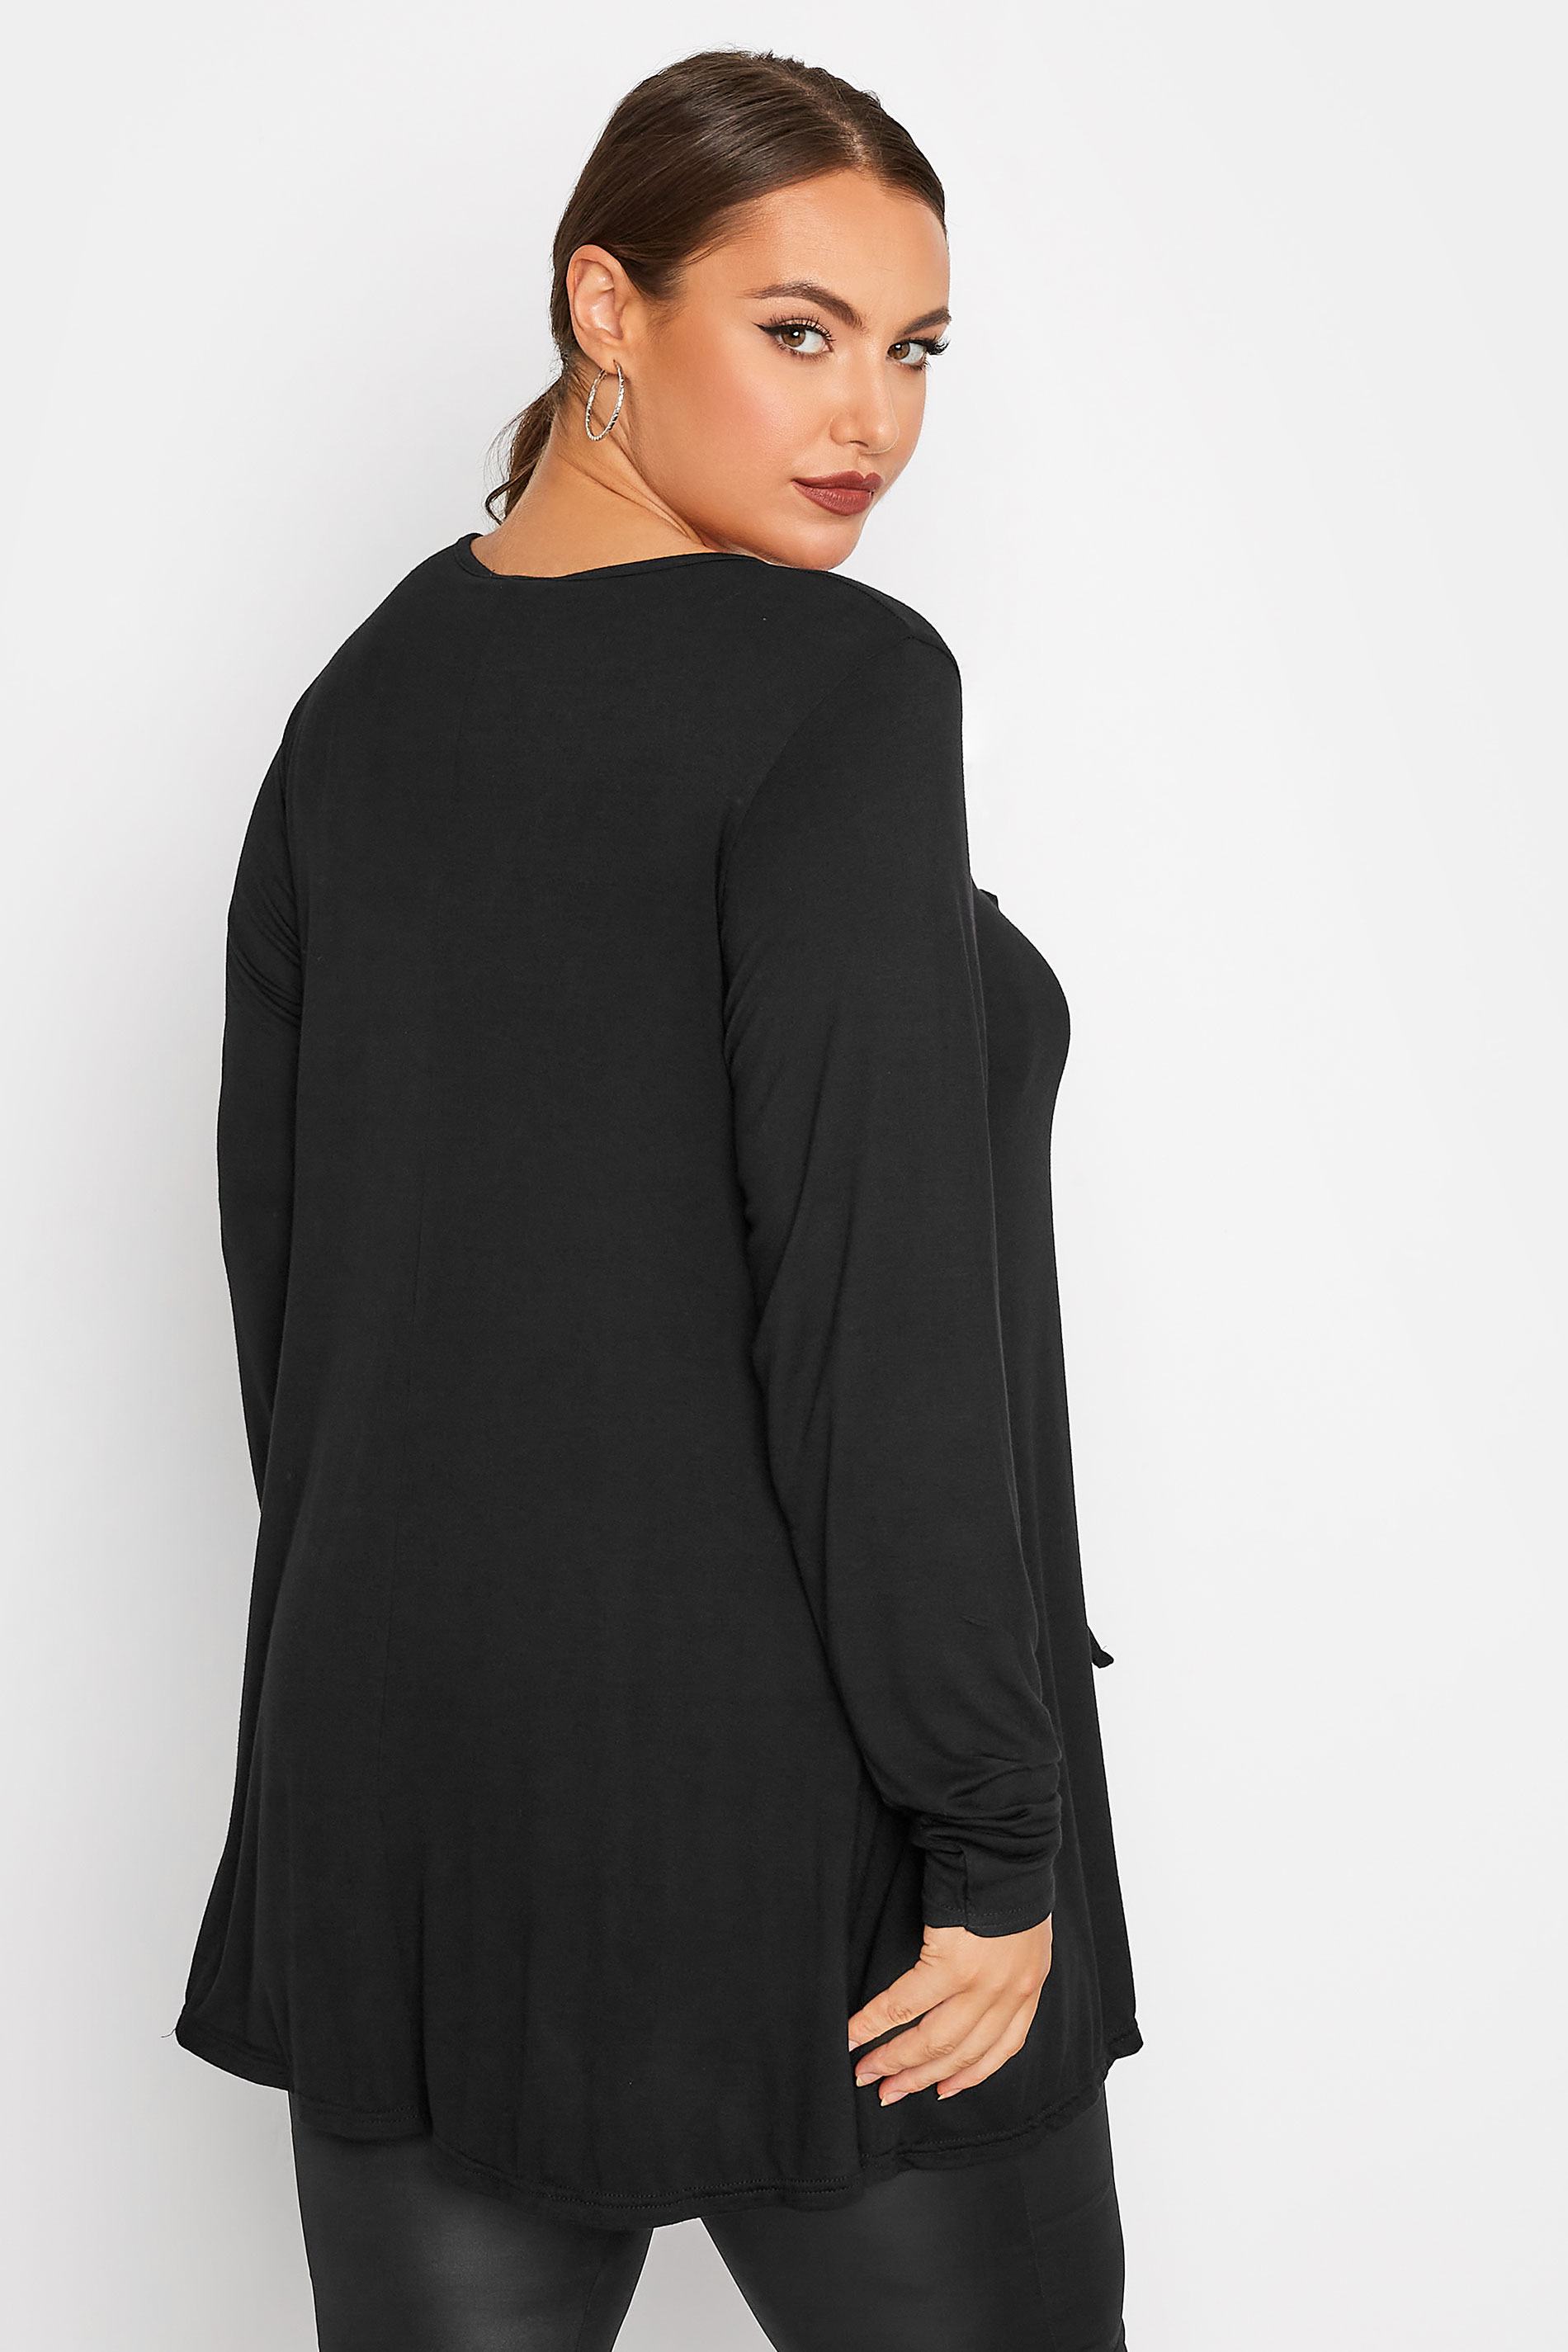 LIMITED COLLECTION Plus Size Black Keyhole Tie Long Sleeve Top | Yours Clothing  3